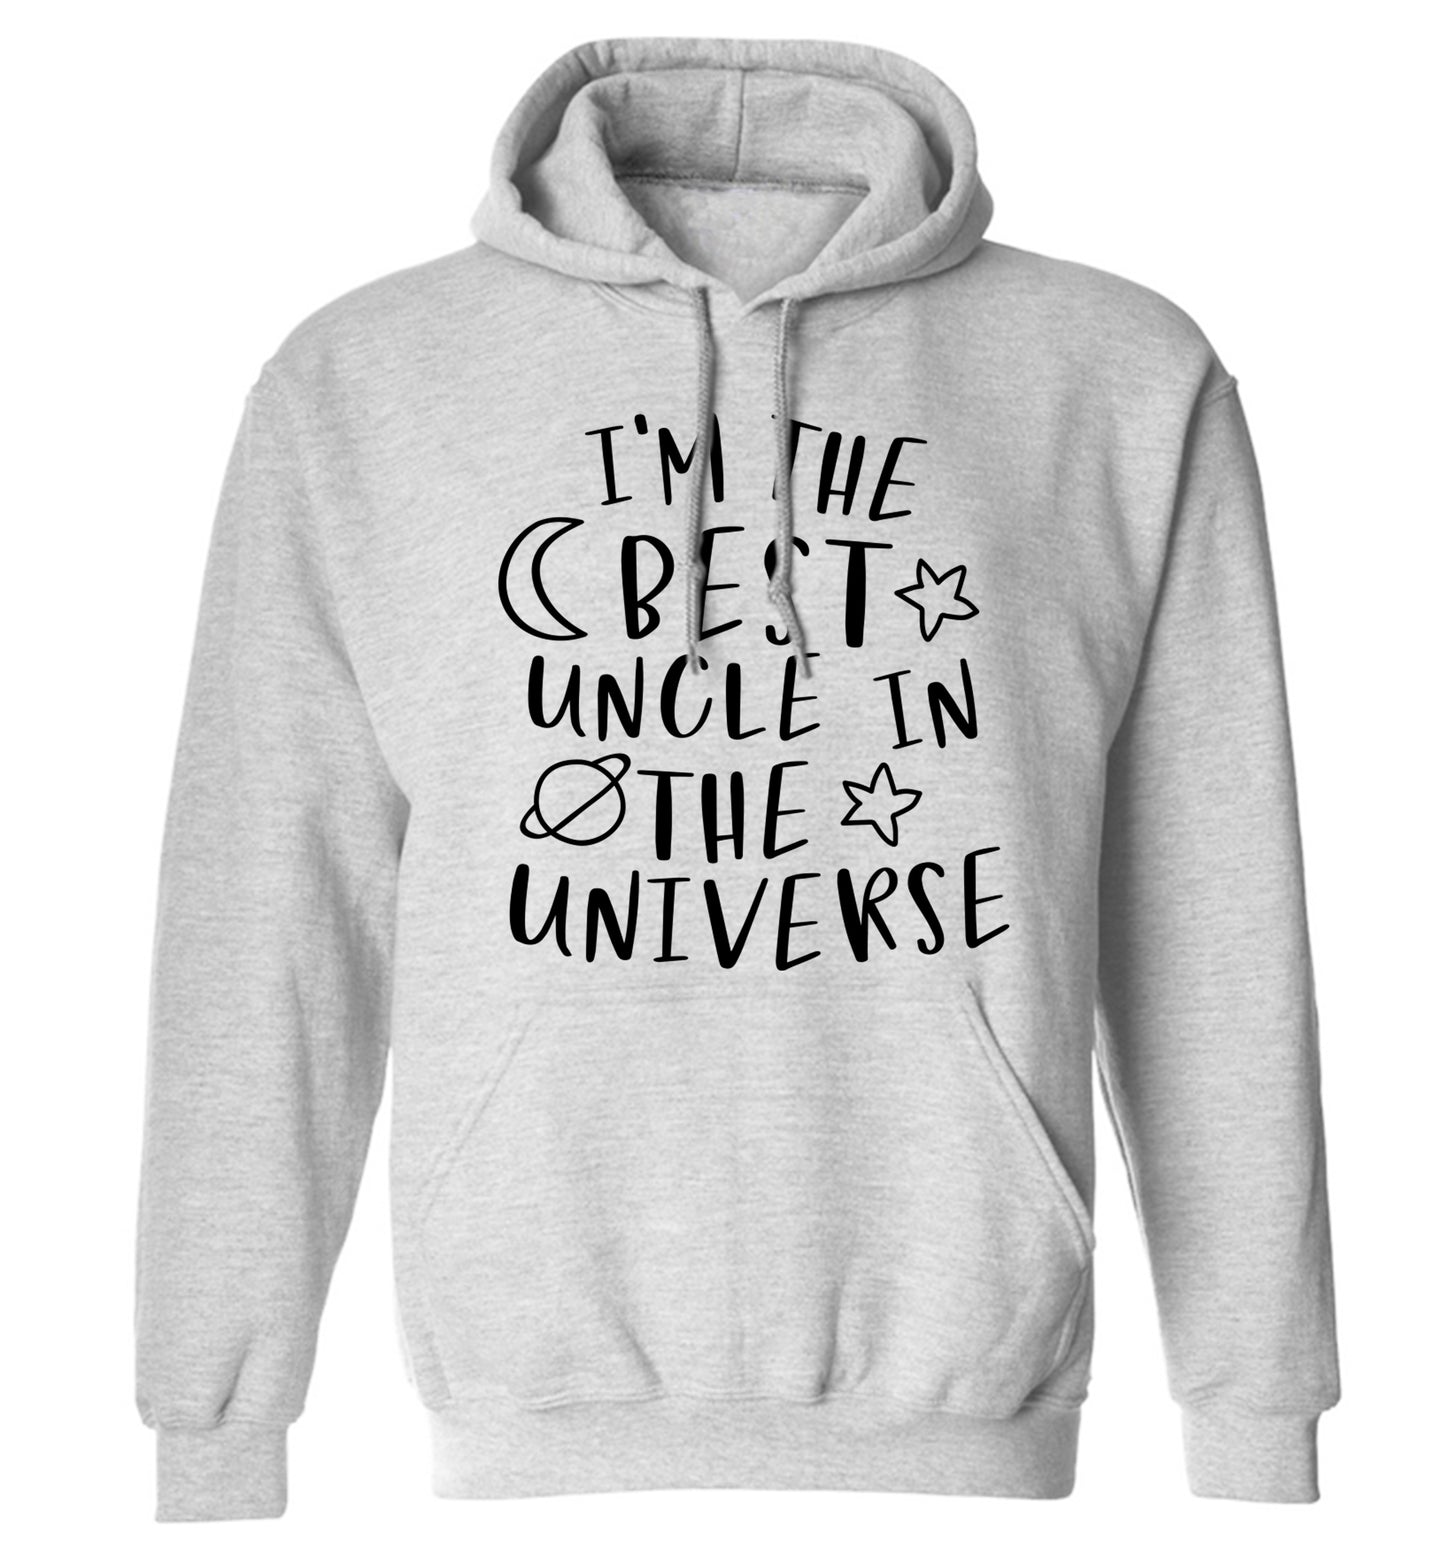 I'm the best uncle in the universe adults unisex grey hoodie 2XL